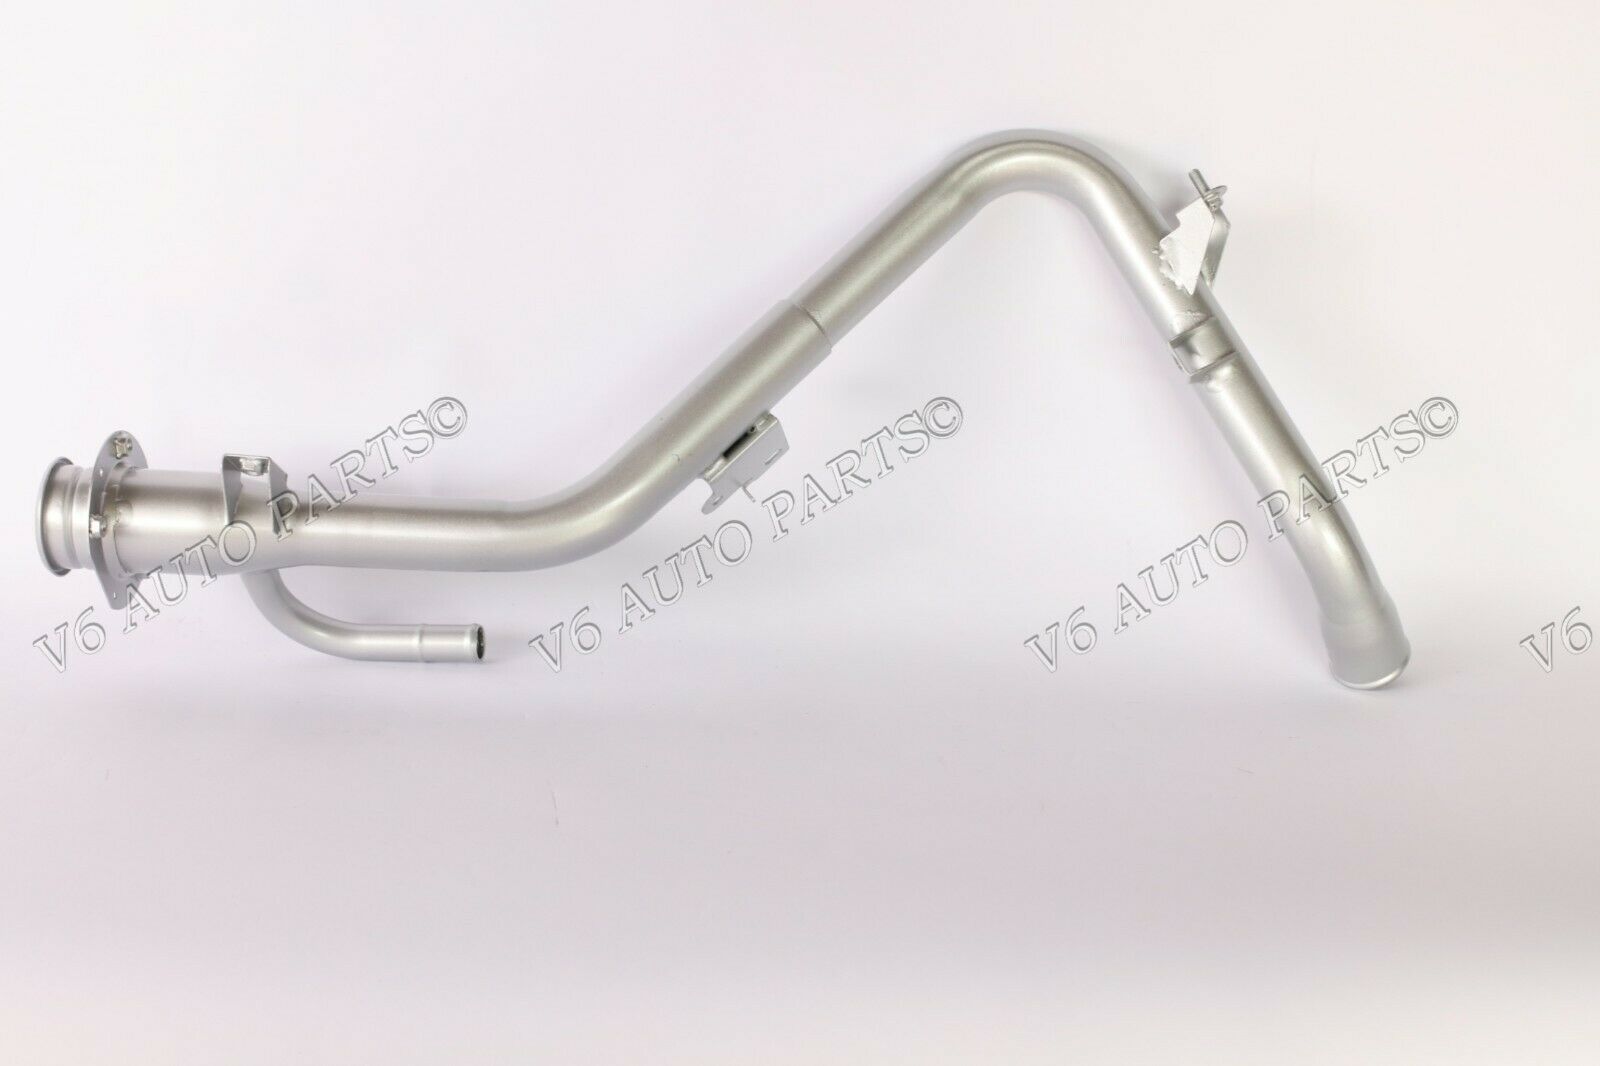 PETROL TANK FUEL FILLER NECK PIPE BRAND FOR 2005 - 2008 SUBARU FORESTER LEGACY